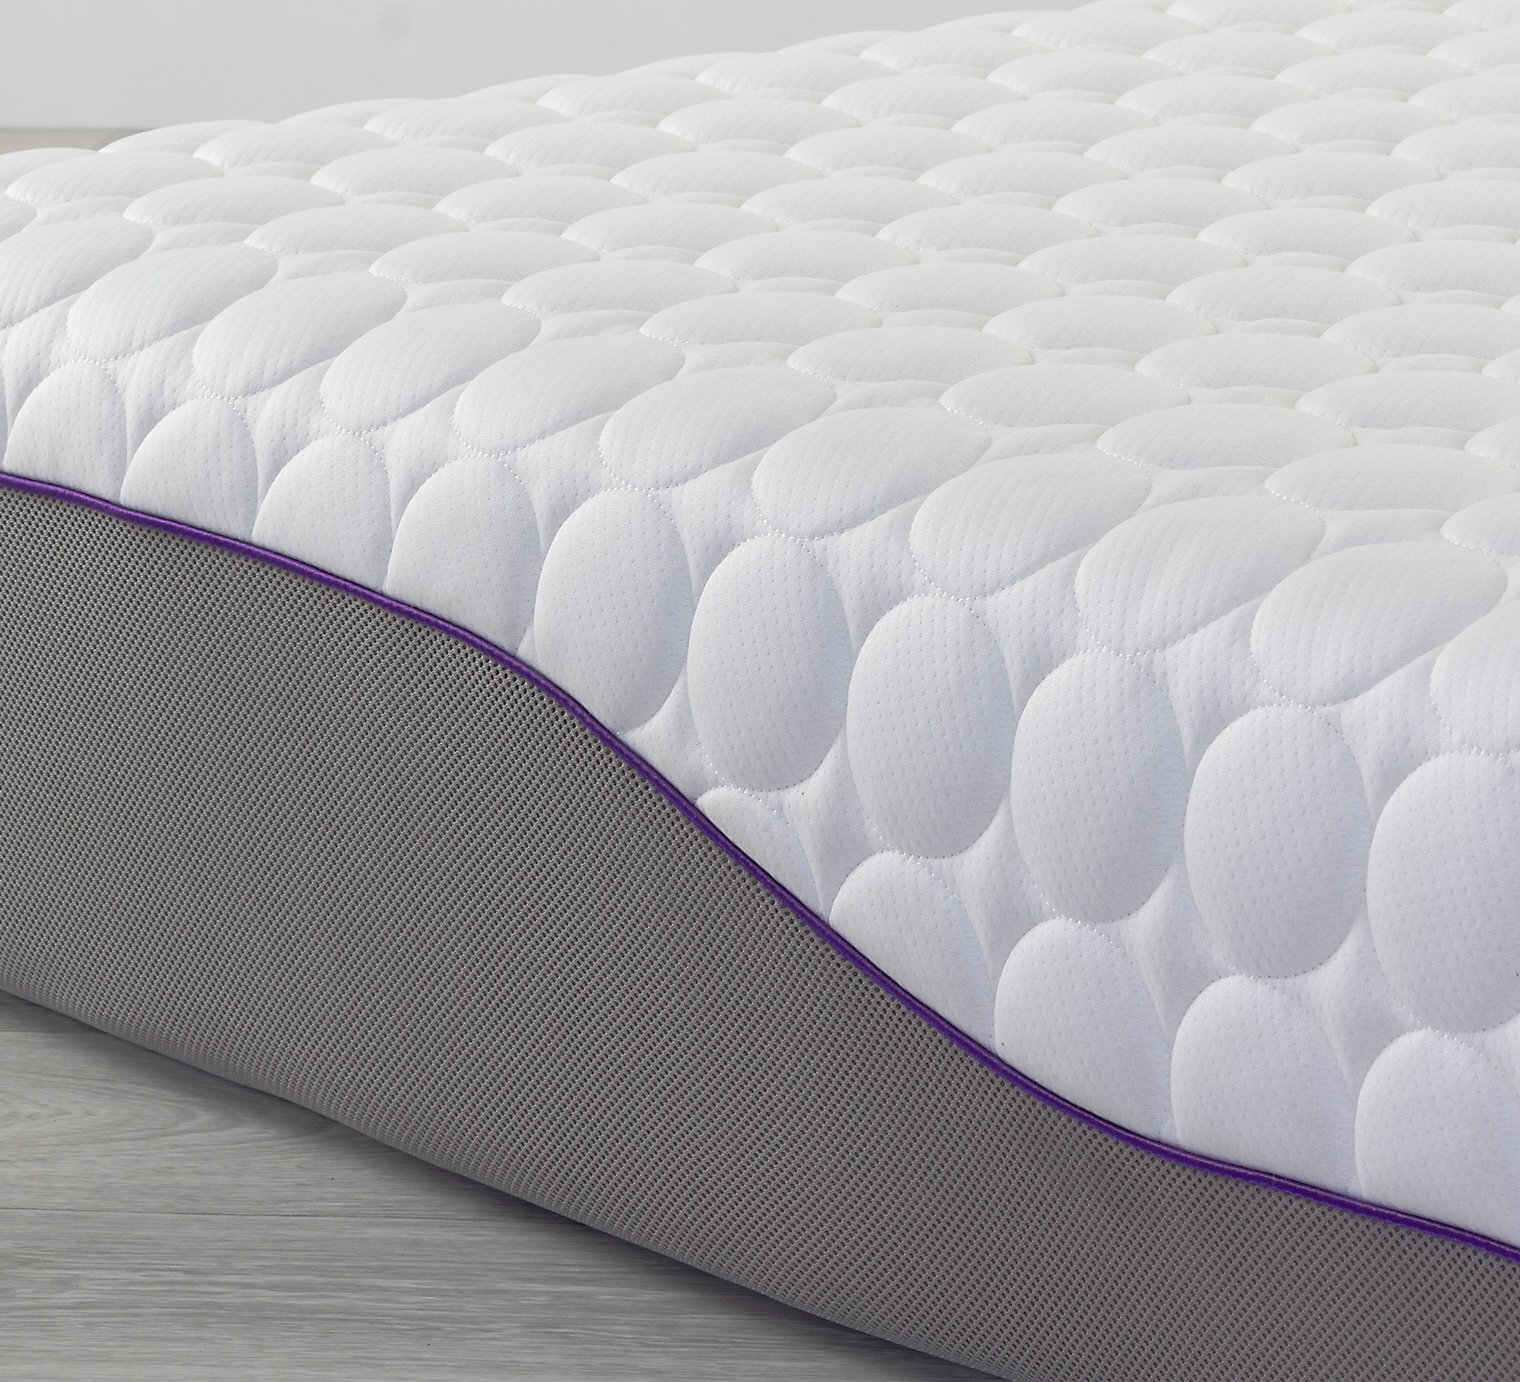 Mammoth Rise Essential Double Mattress 